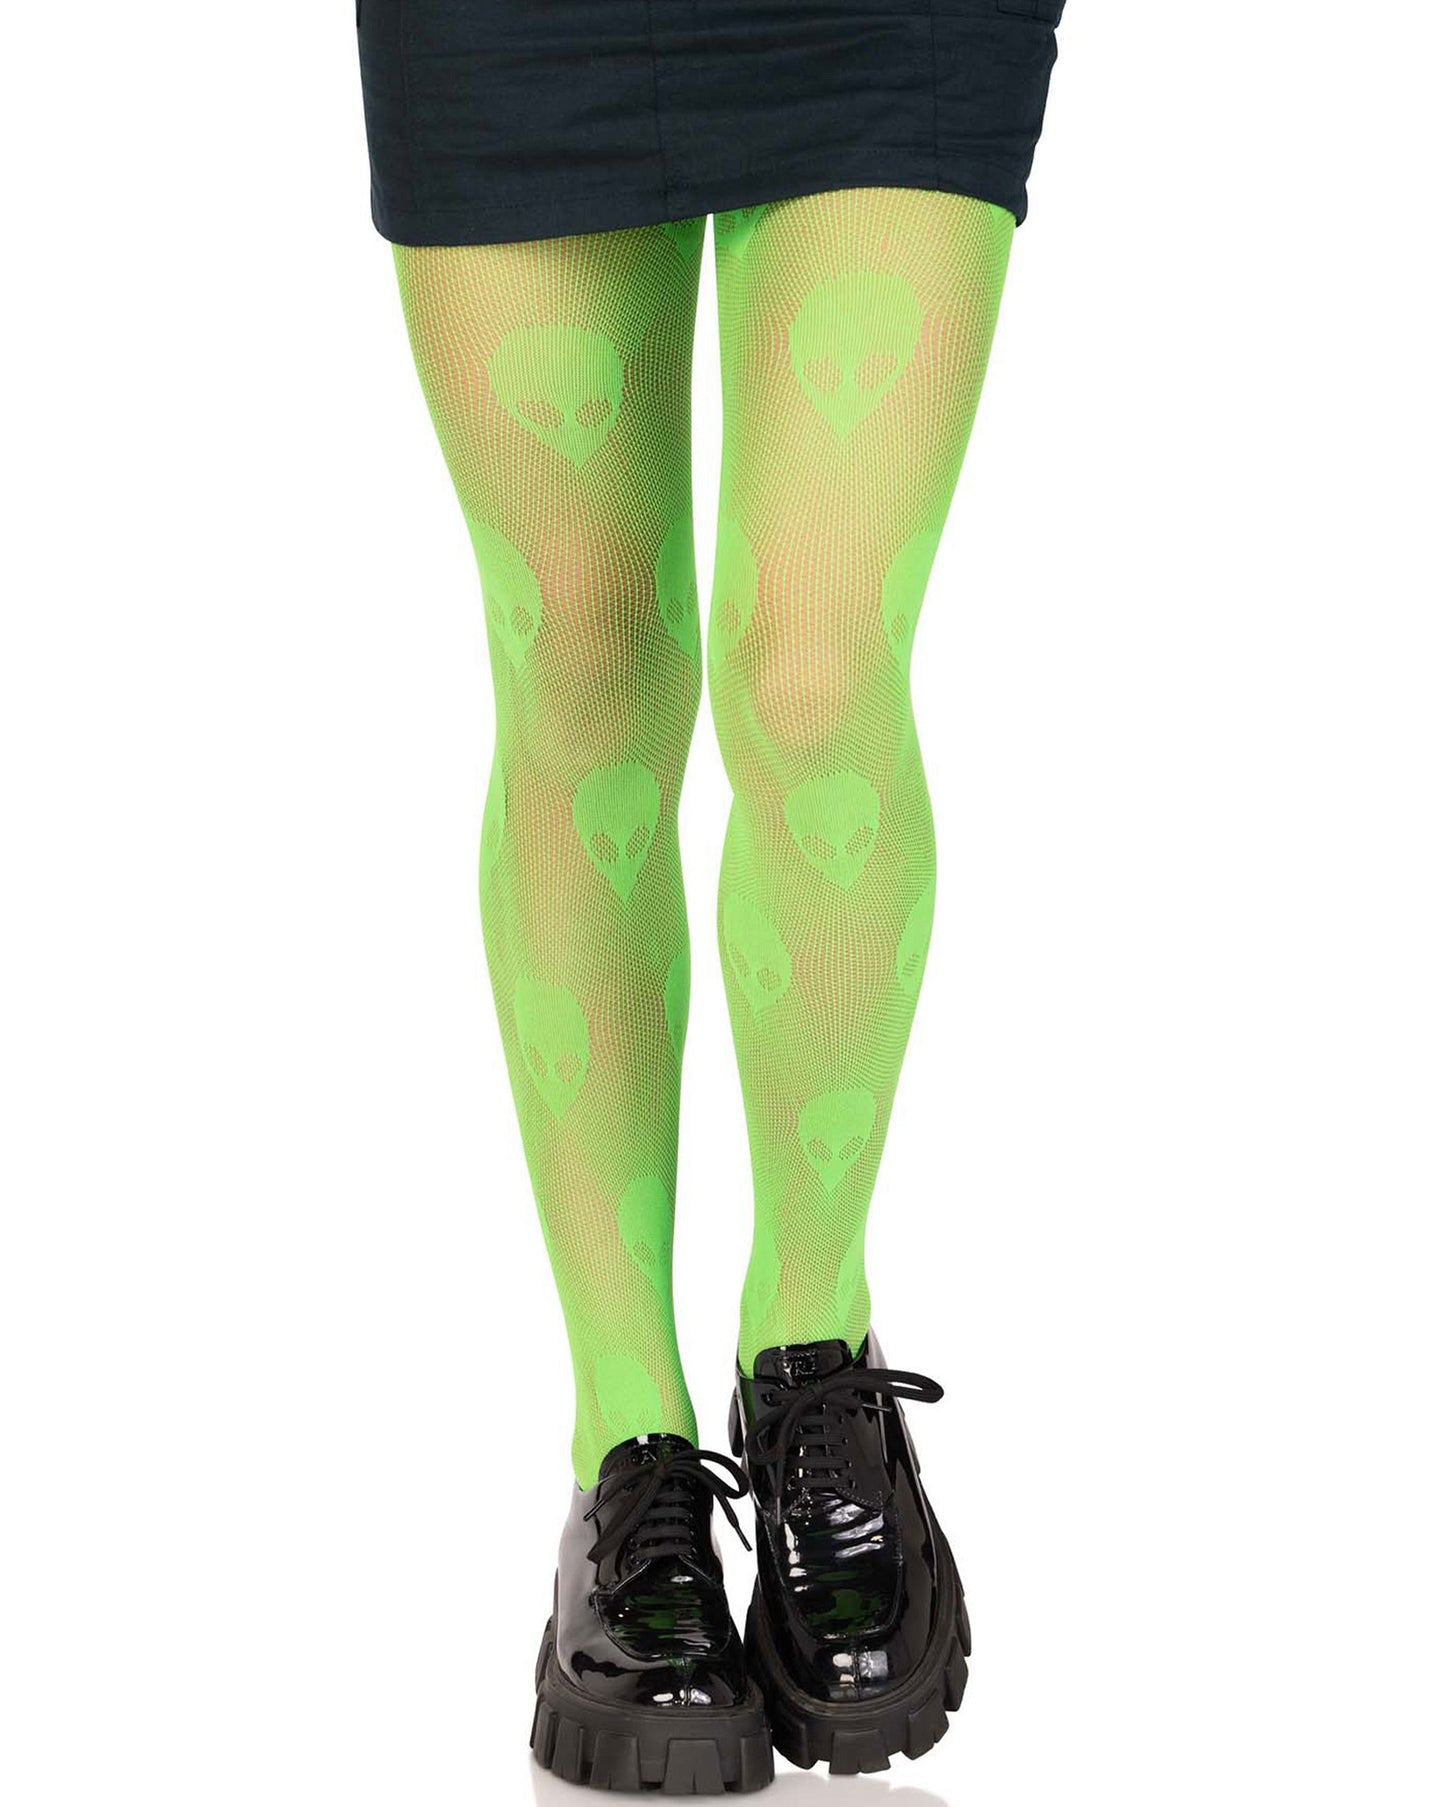 Leg Avenue 9728 Alien Net Tights - Bright neon green fashion fishnet tights with alien head design pattern. Worn with a black mini skirt and chunky black patent shoes.